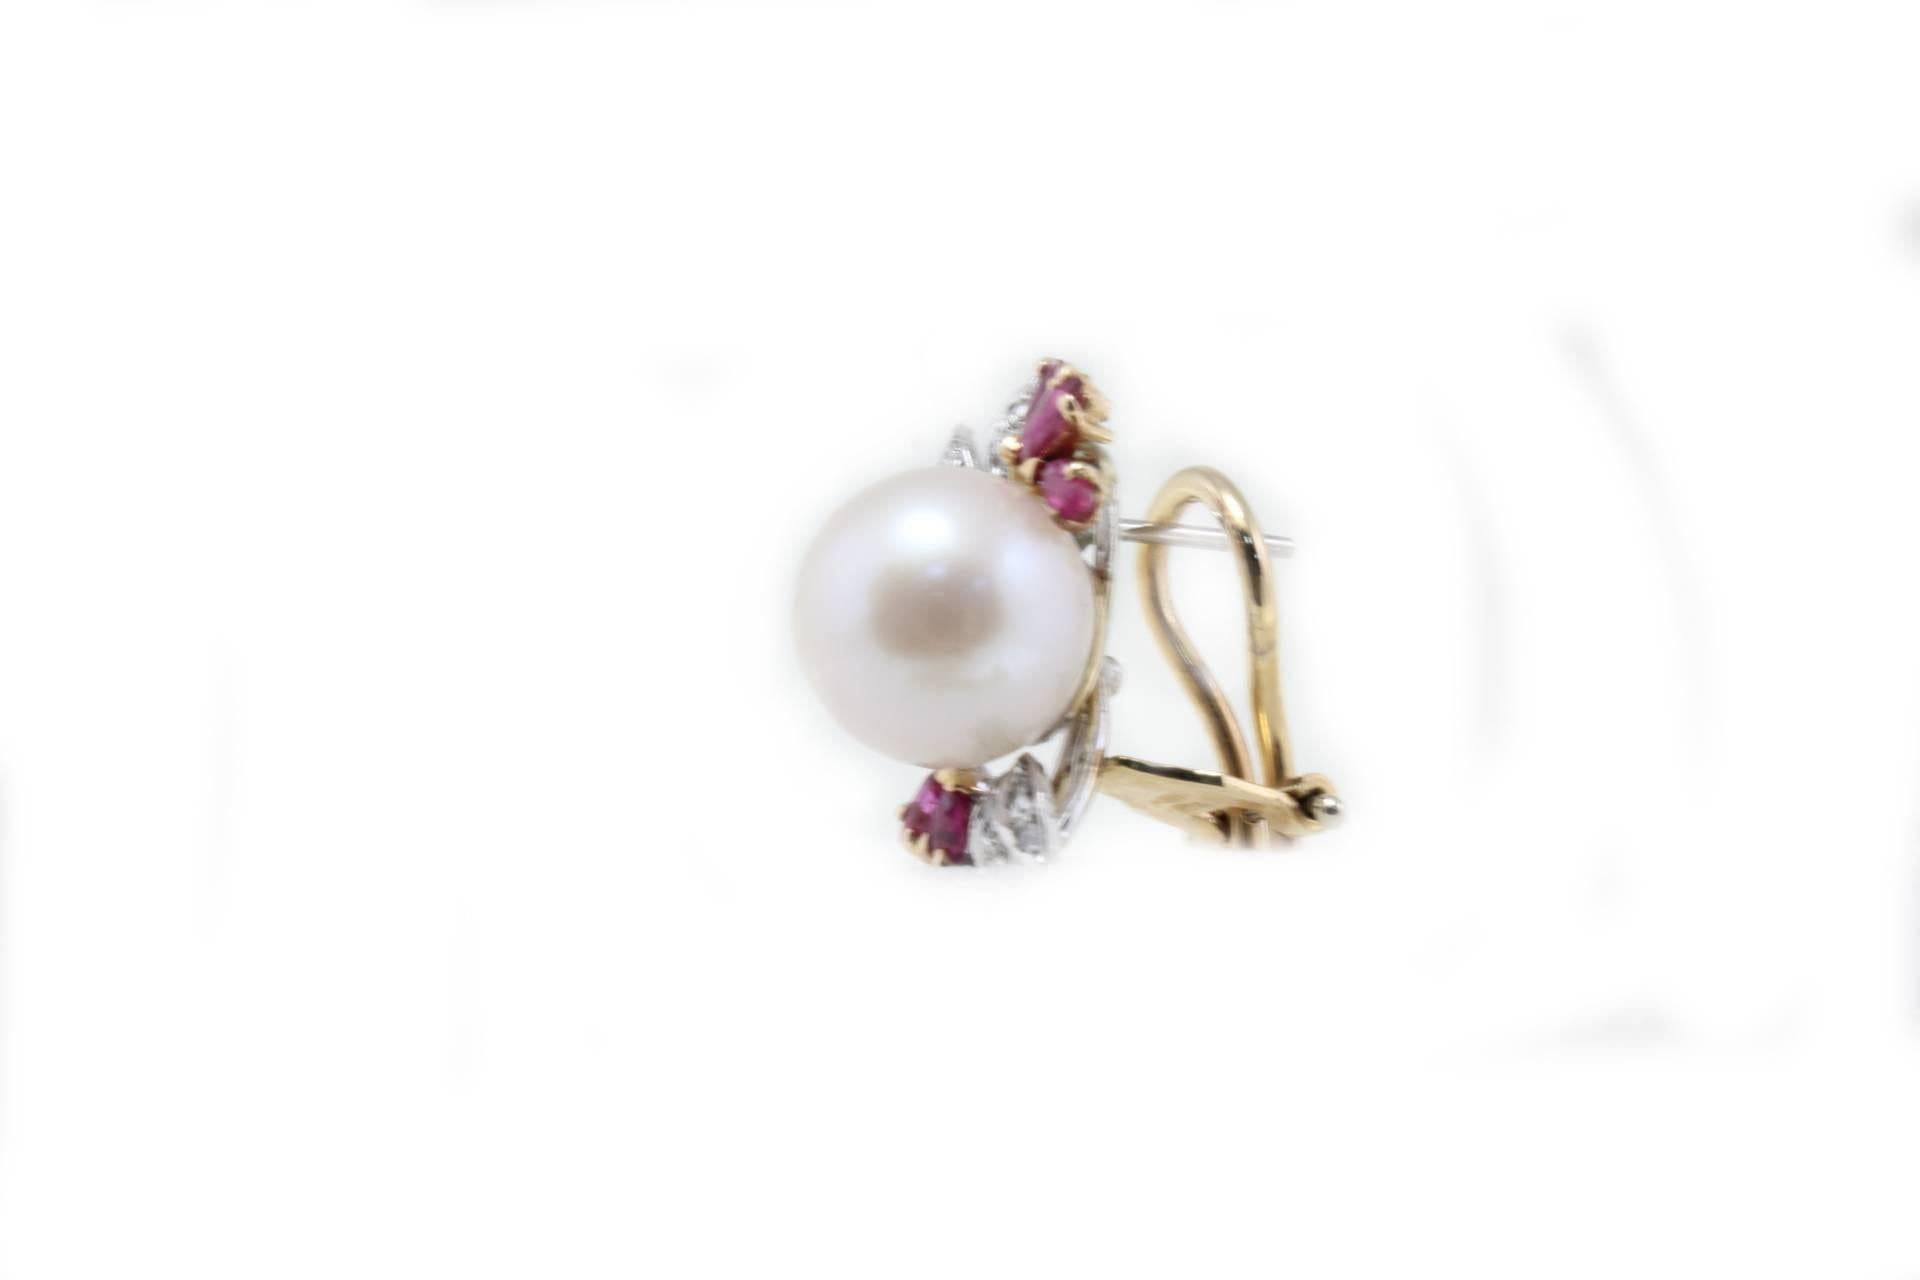 Retro Sea Pearls Gold  Earrings with Diamonds and Rubies